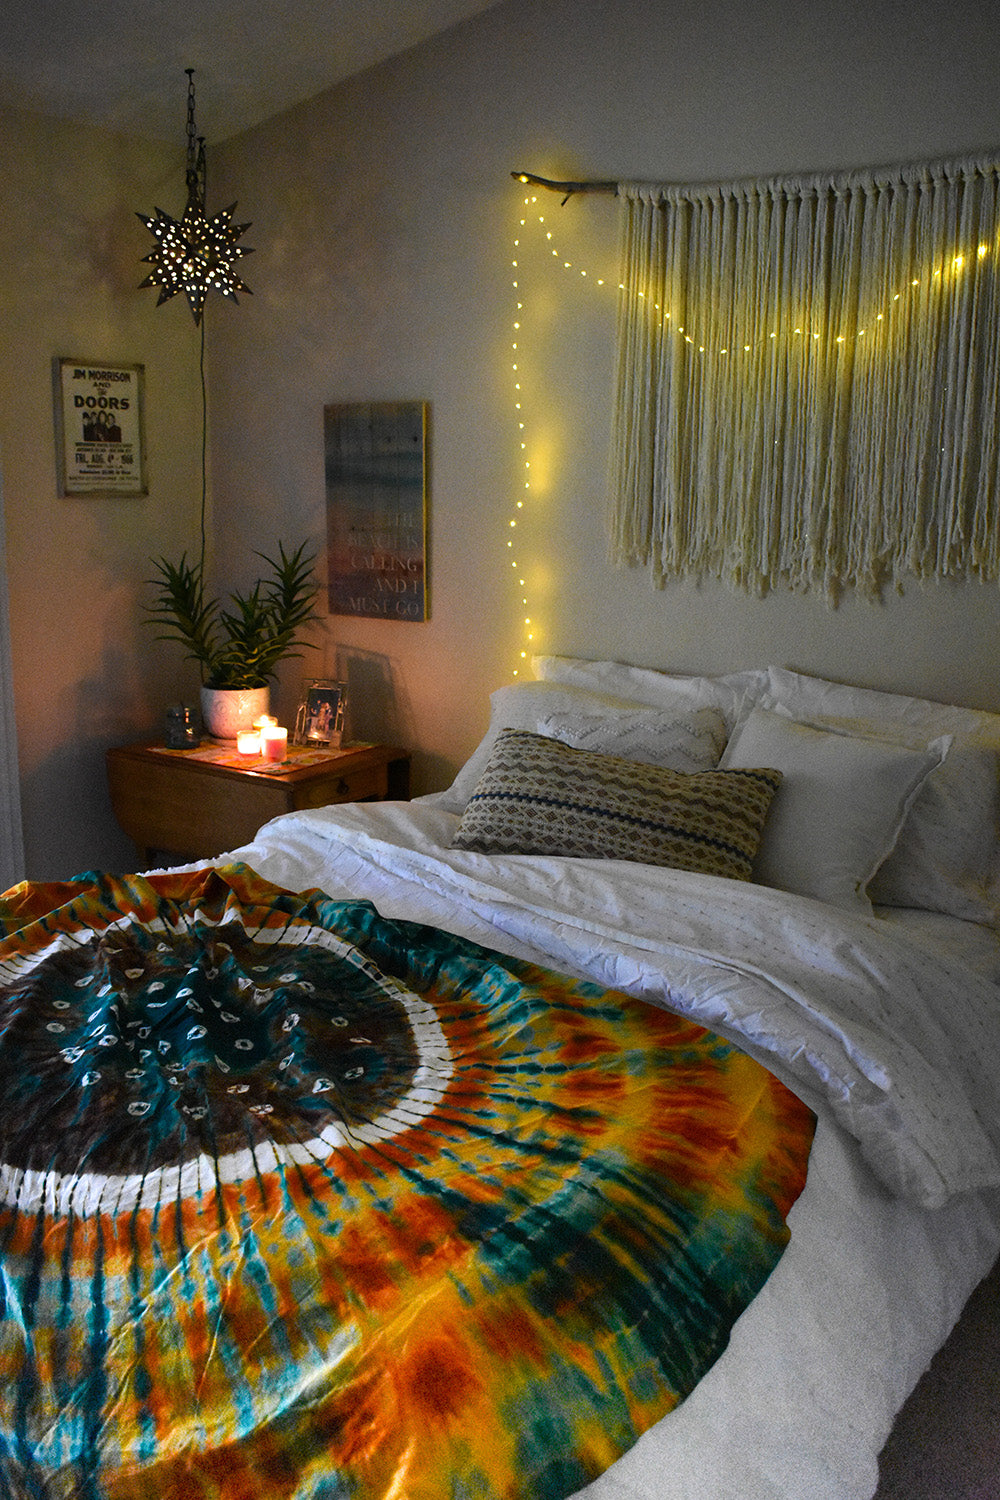 Soft lights & candles are a must have for the boho hygge home.